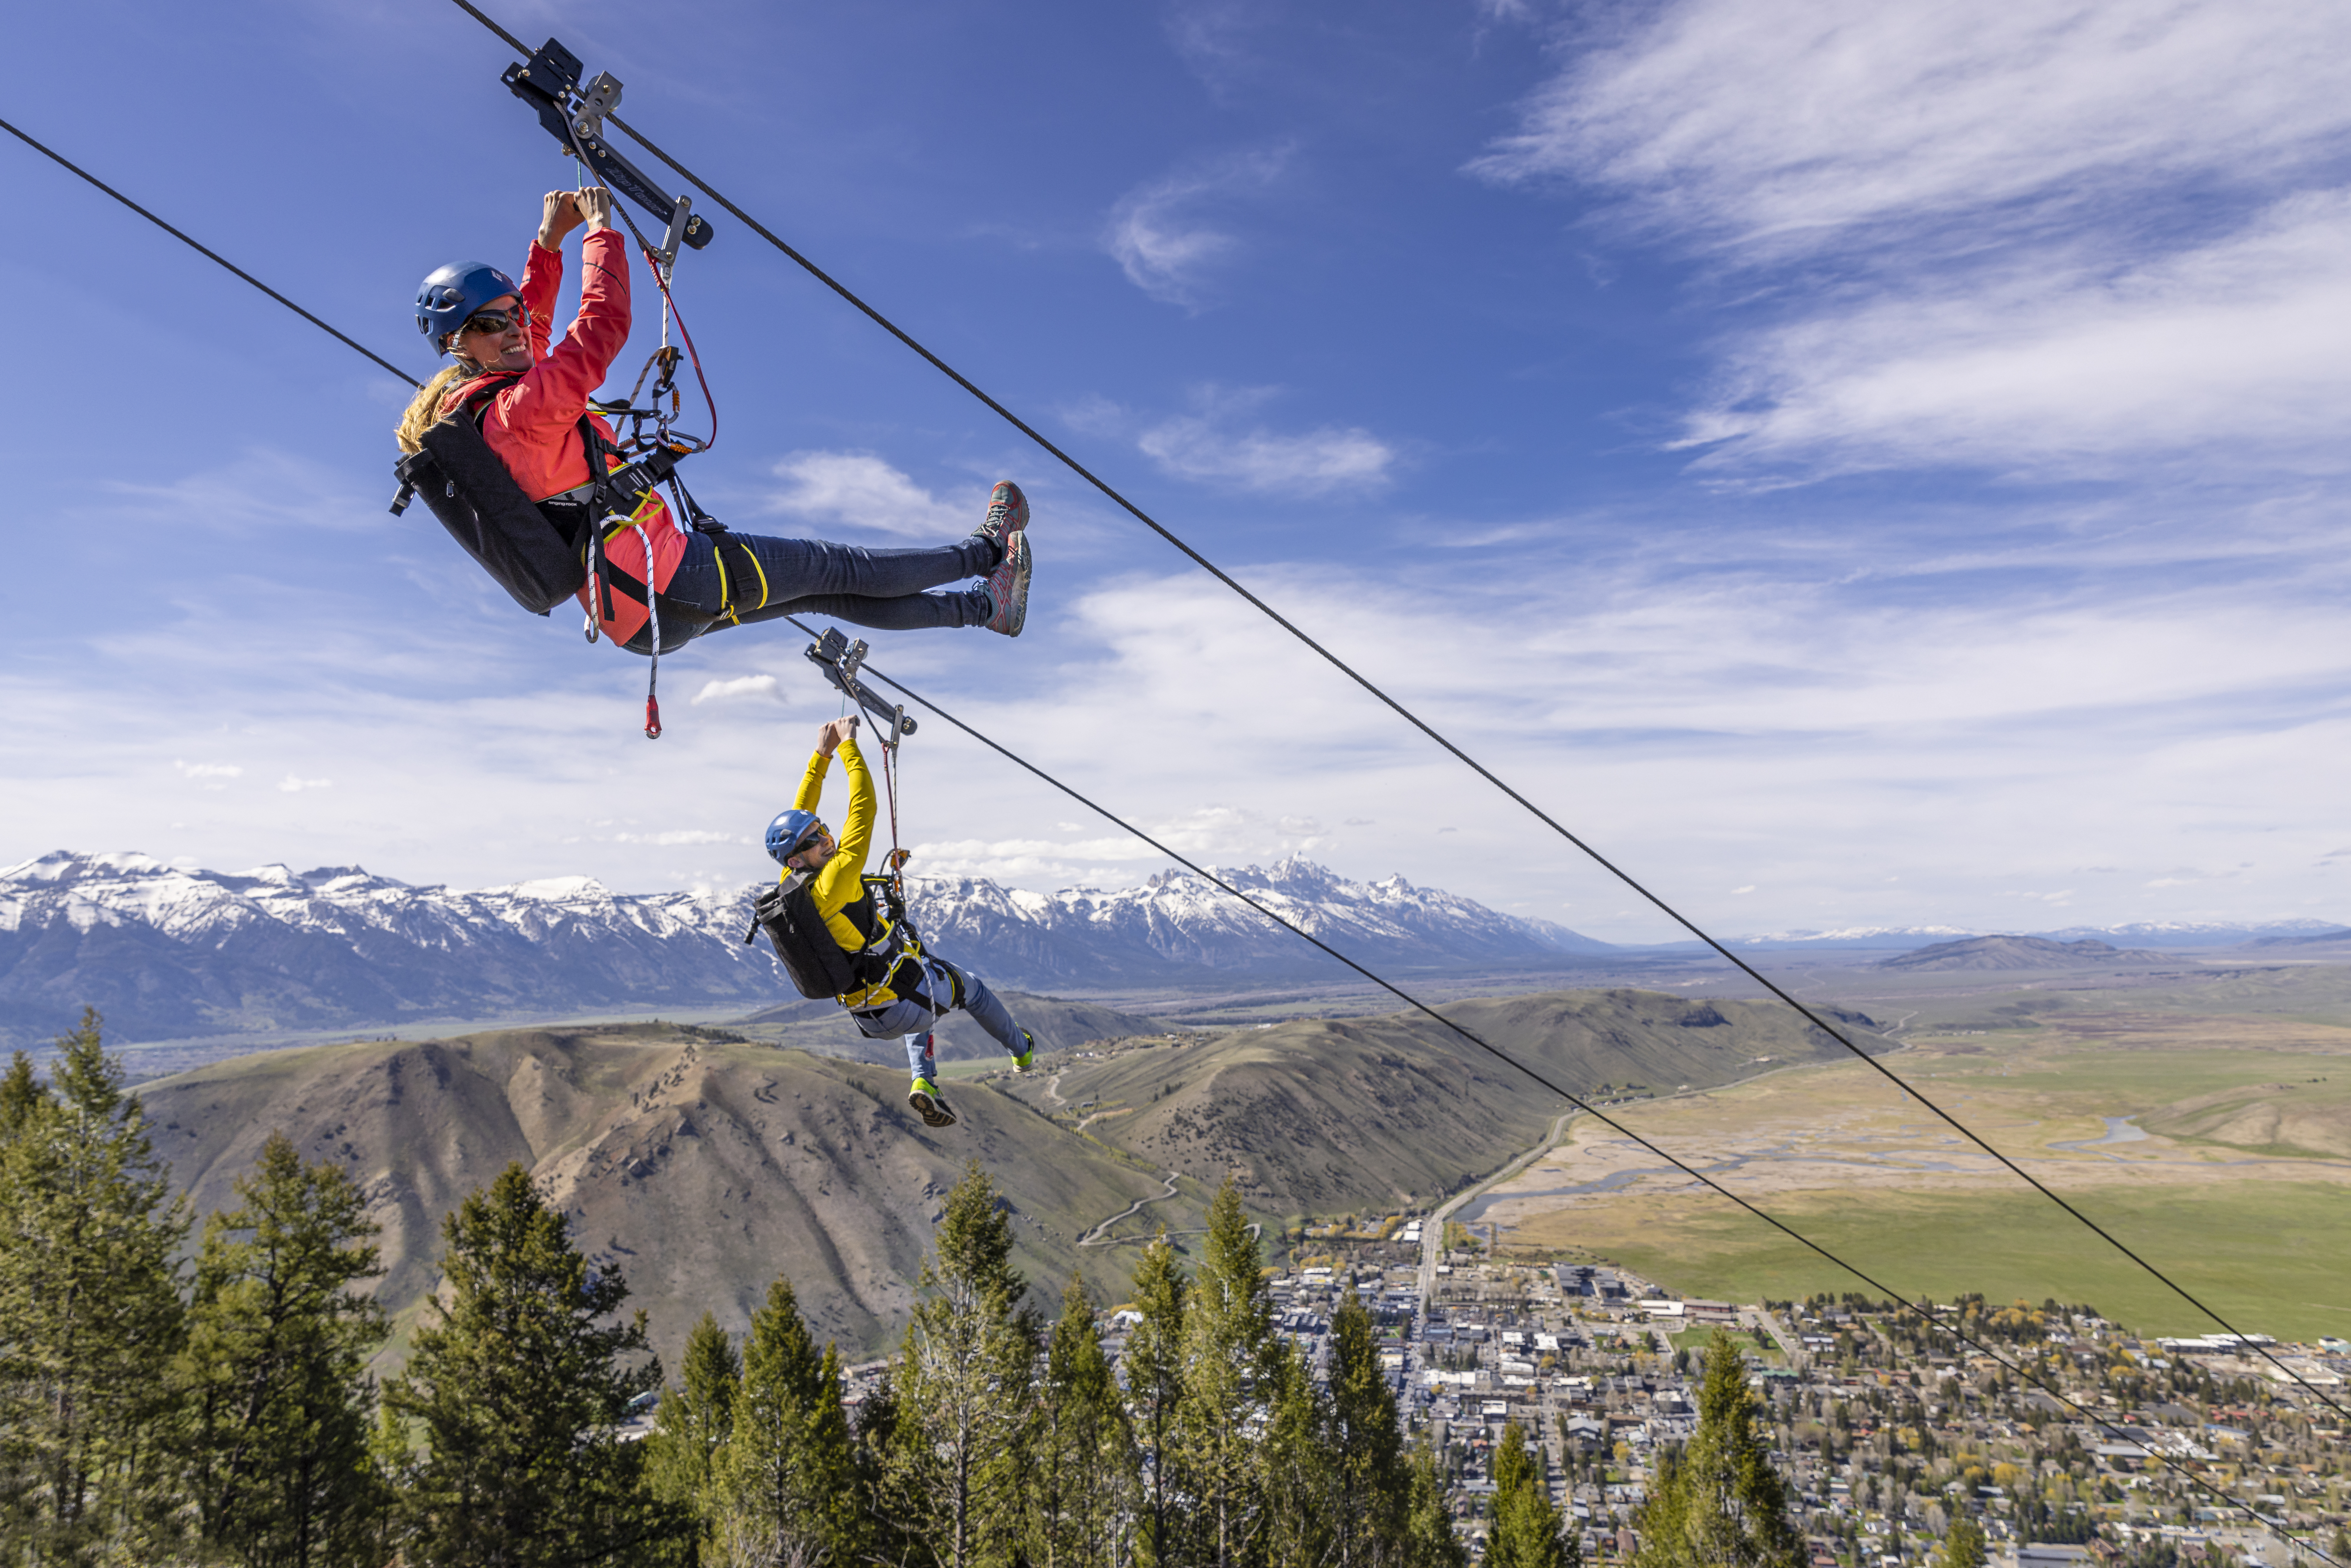 A man and woman glide down a zipline suspended over trees with mountains in the distance in Jackson Hole, WY